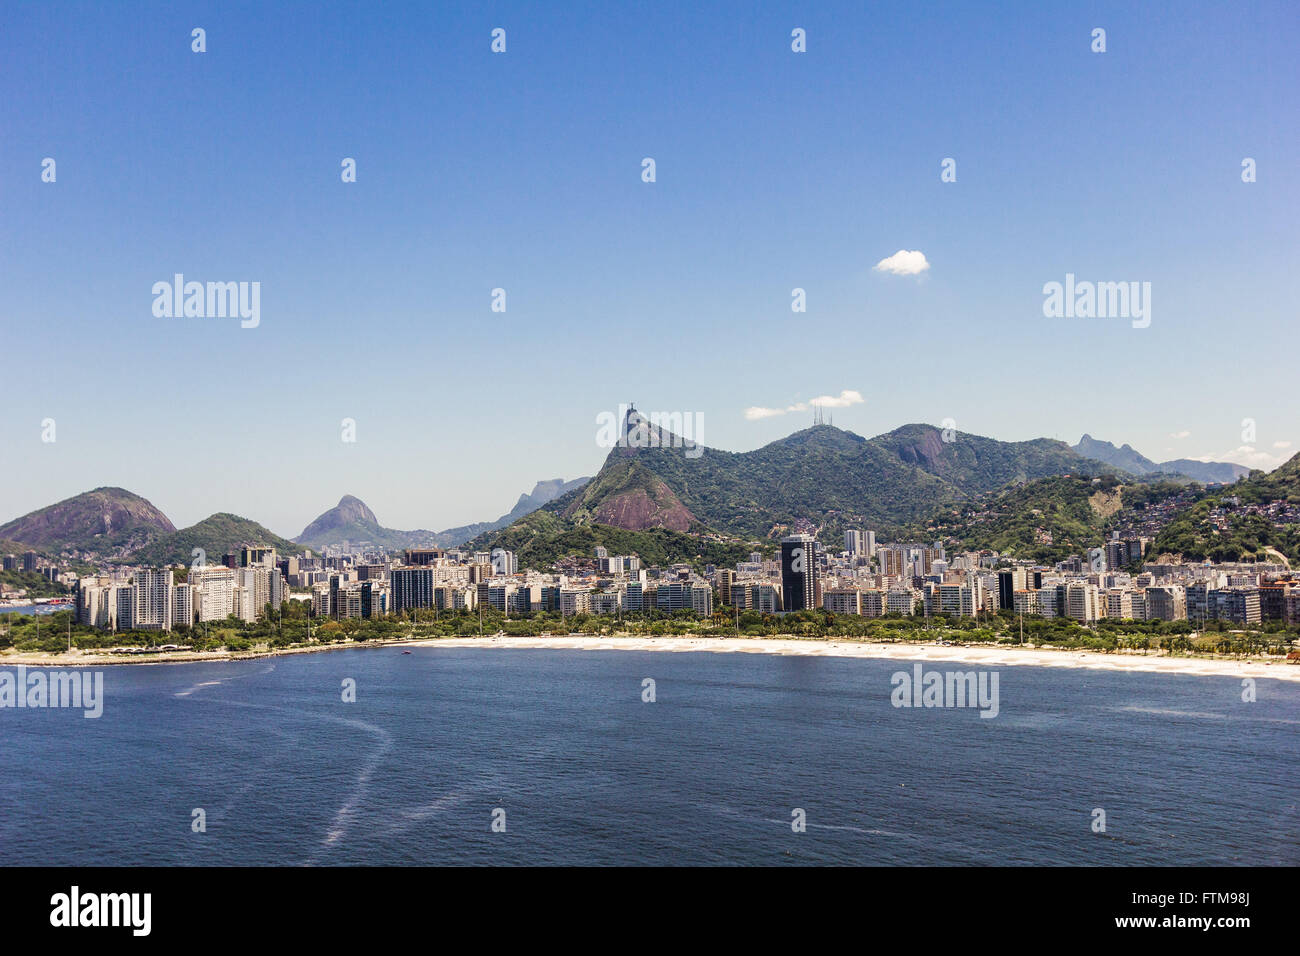 Aerial view of Flamengo Park to Corcovado Mountain in the background Stock Photo